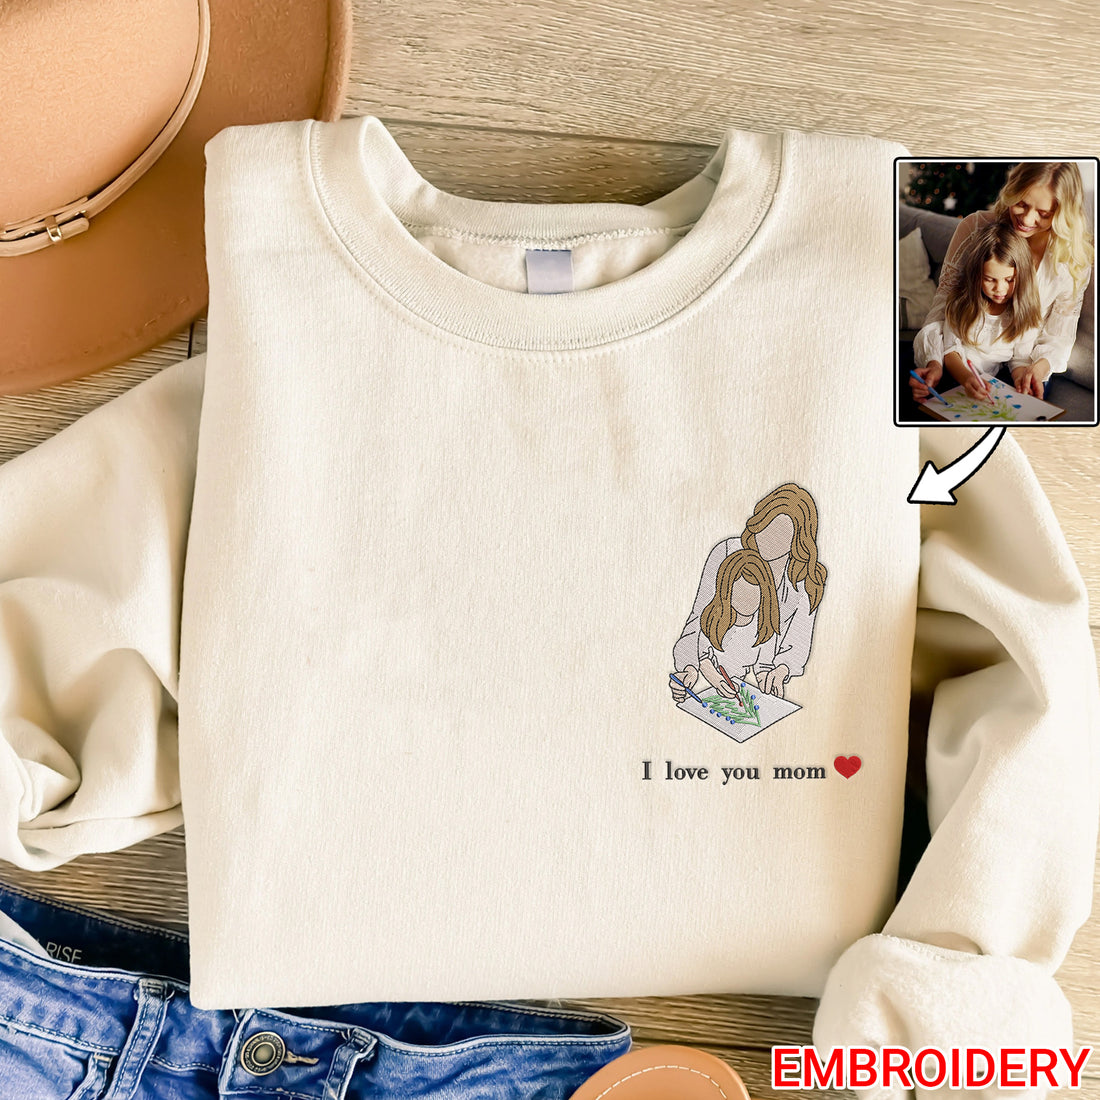 Custom Embroidered Portrait Sweatshirt from Photo, Custom Photo Portrait Sweatshirt, Family Portrait, Mother's Day Gift